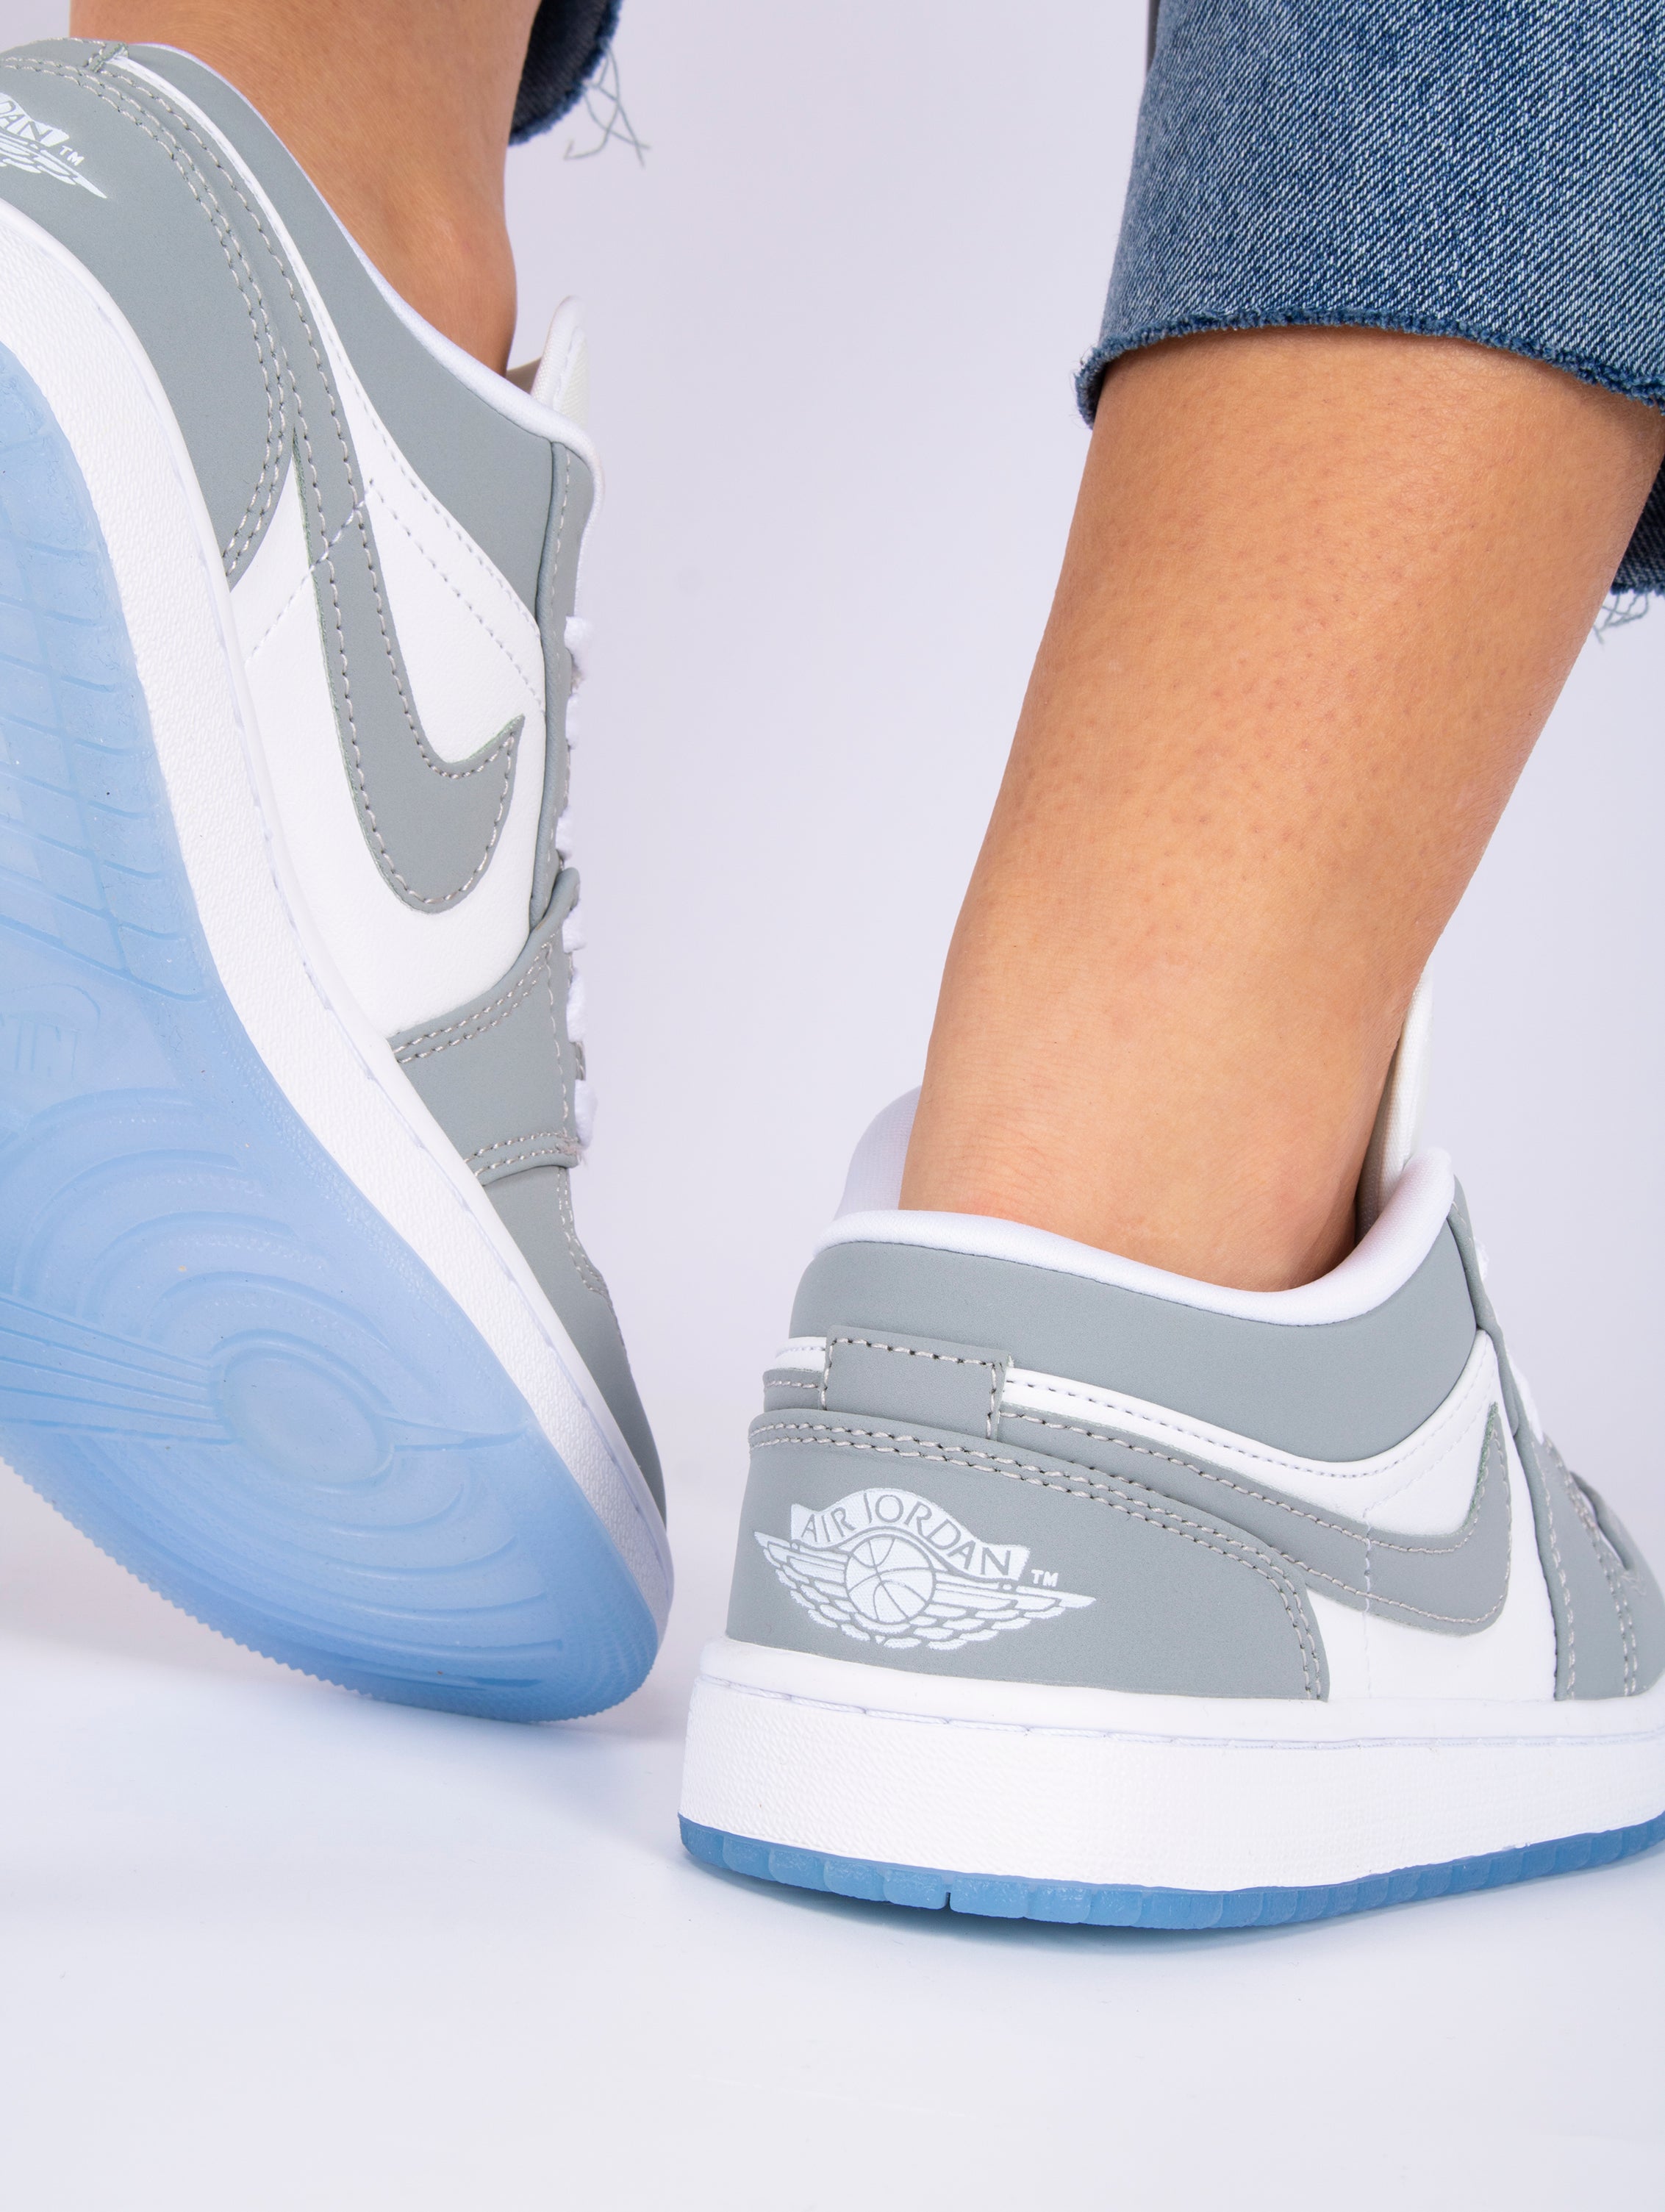 Nike Air Jordan 1 Low Keep It Cool With Grey Uppers And Icy Soles